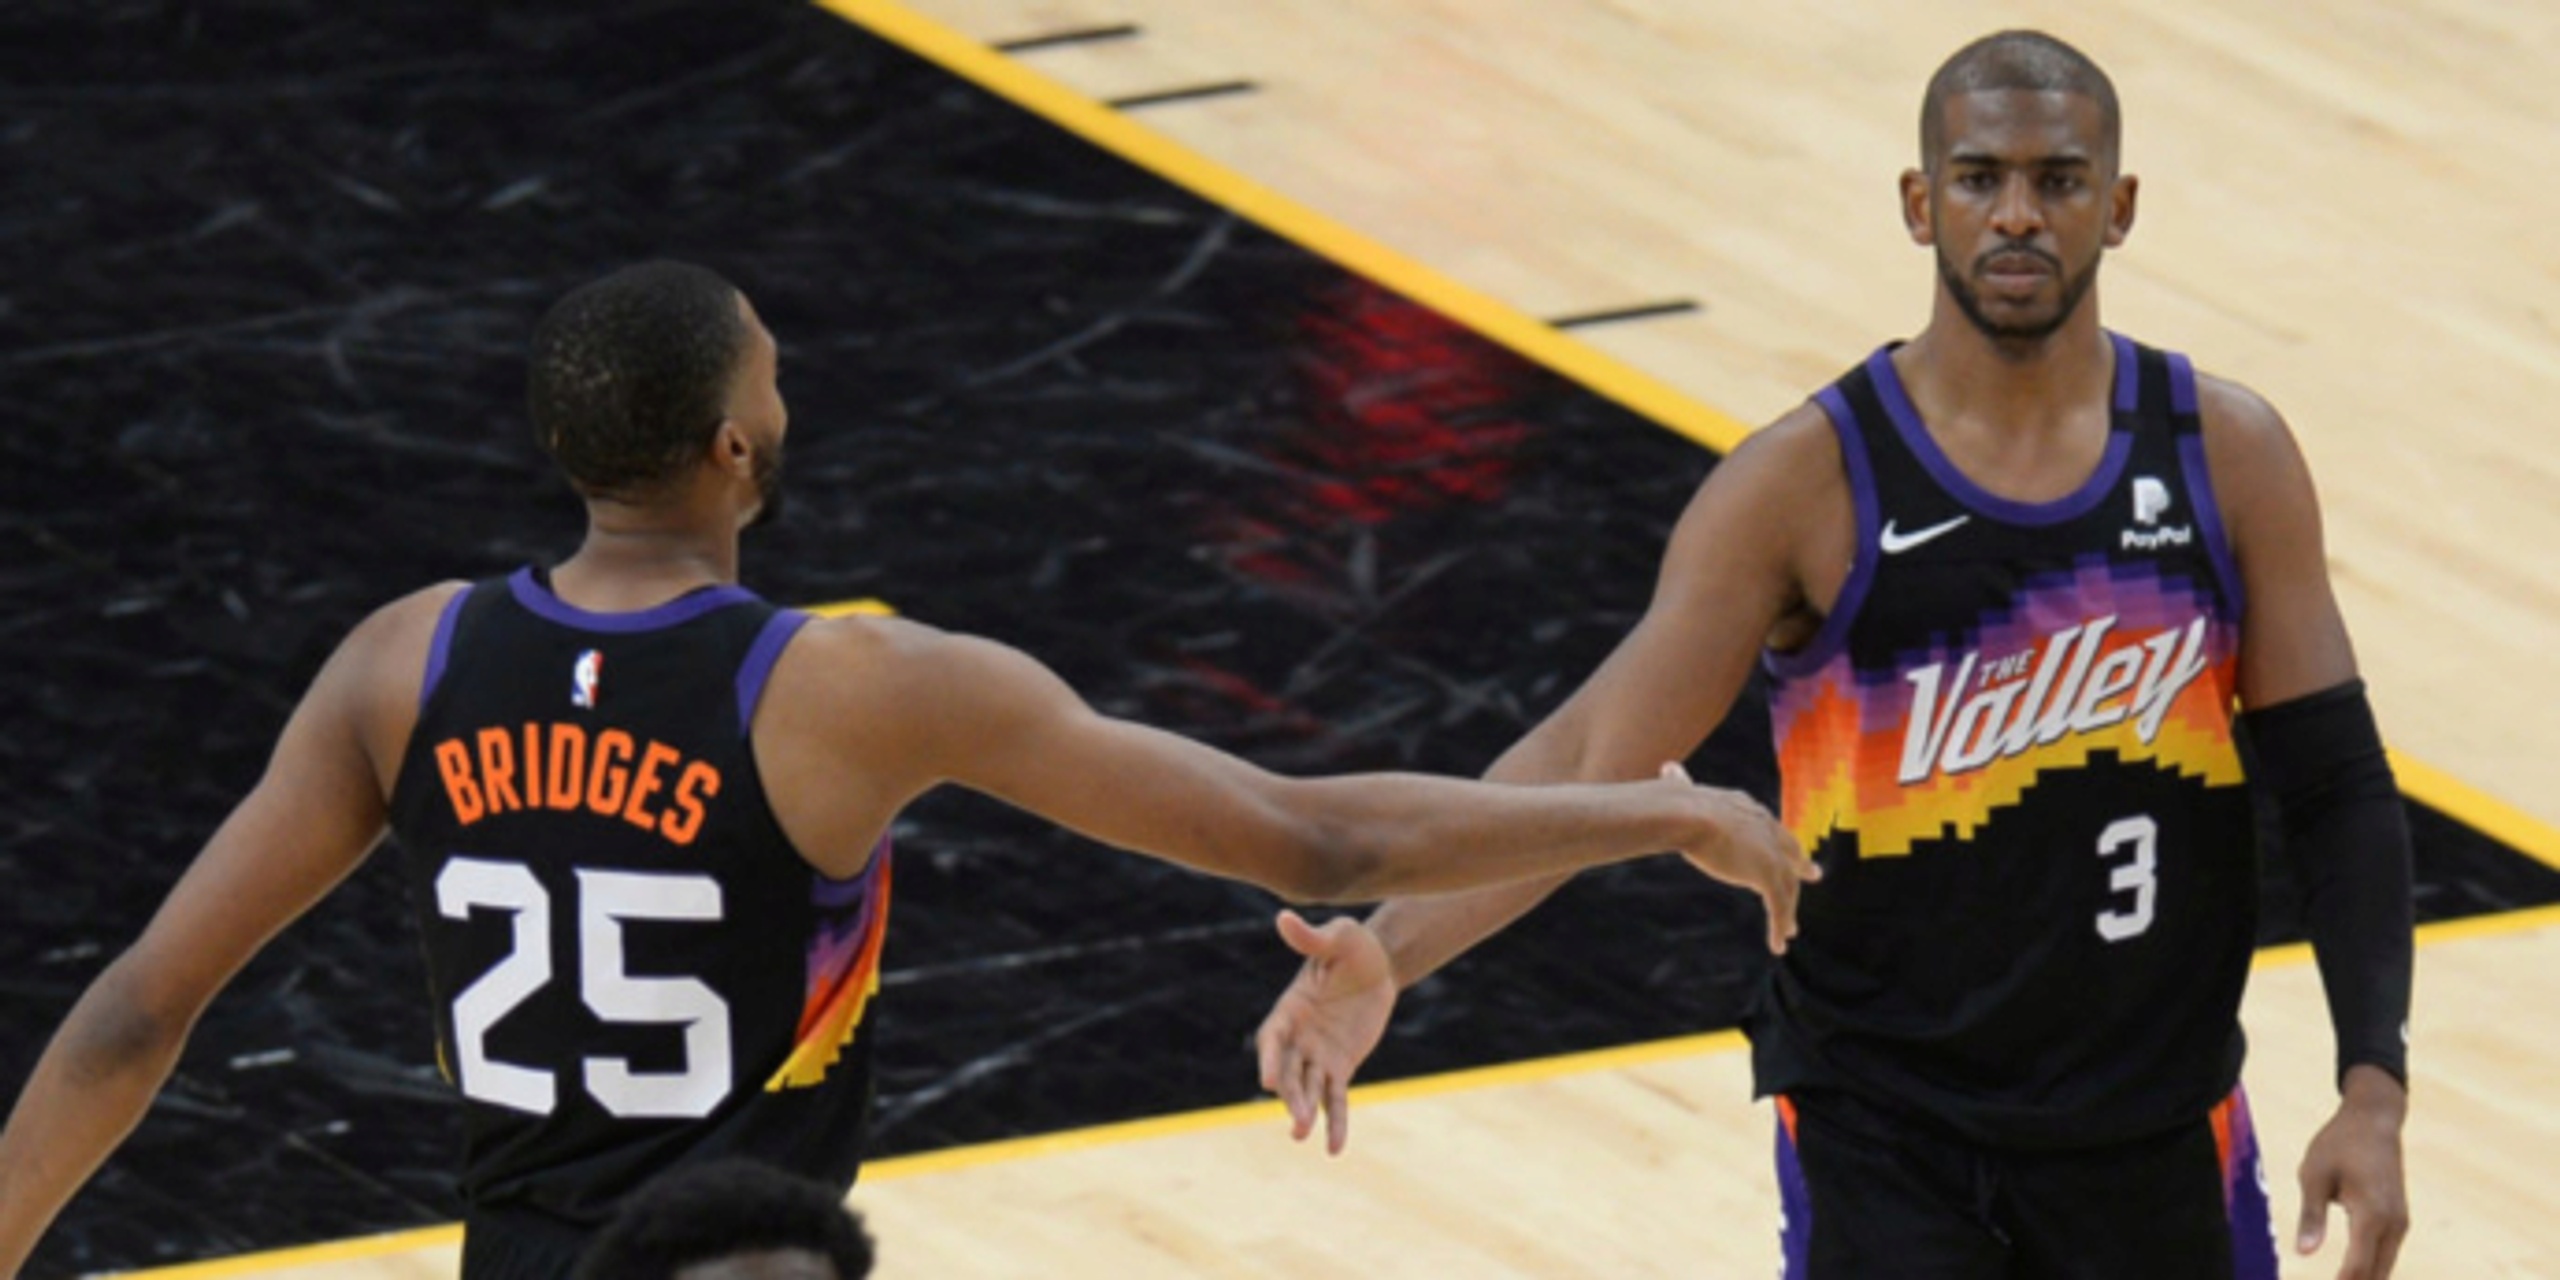 Suns beat Clippers, clinch first playoff spot in 11 years